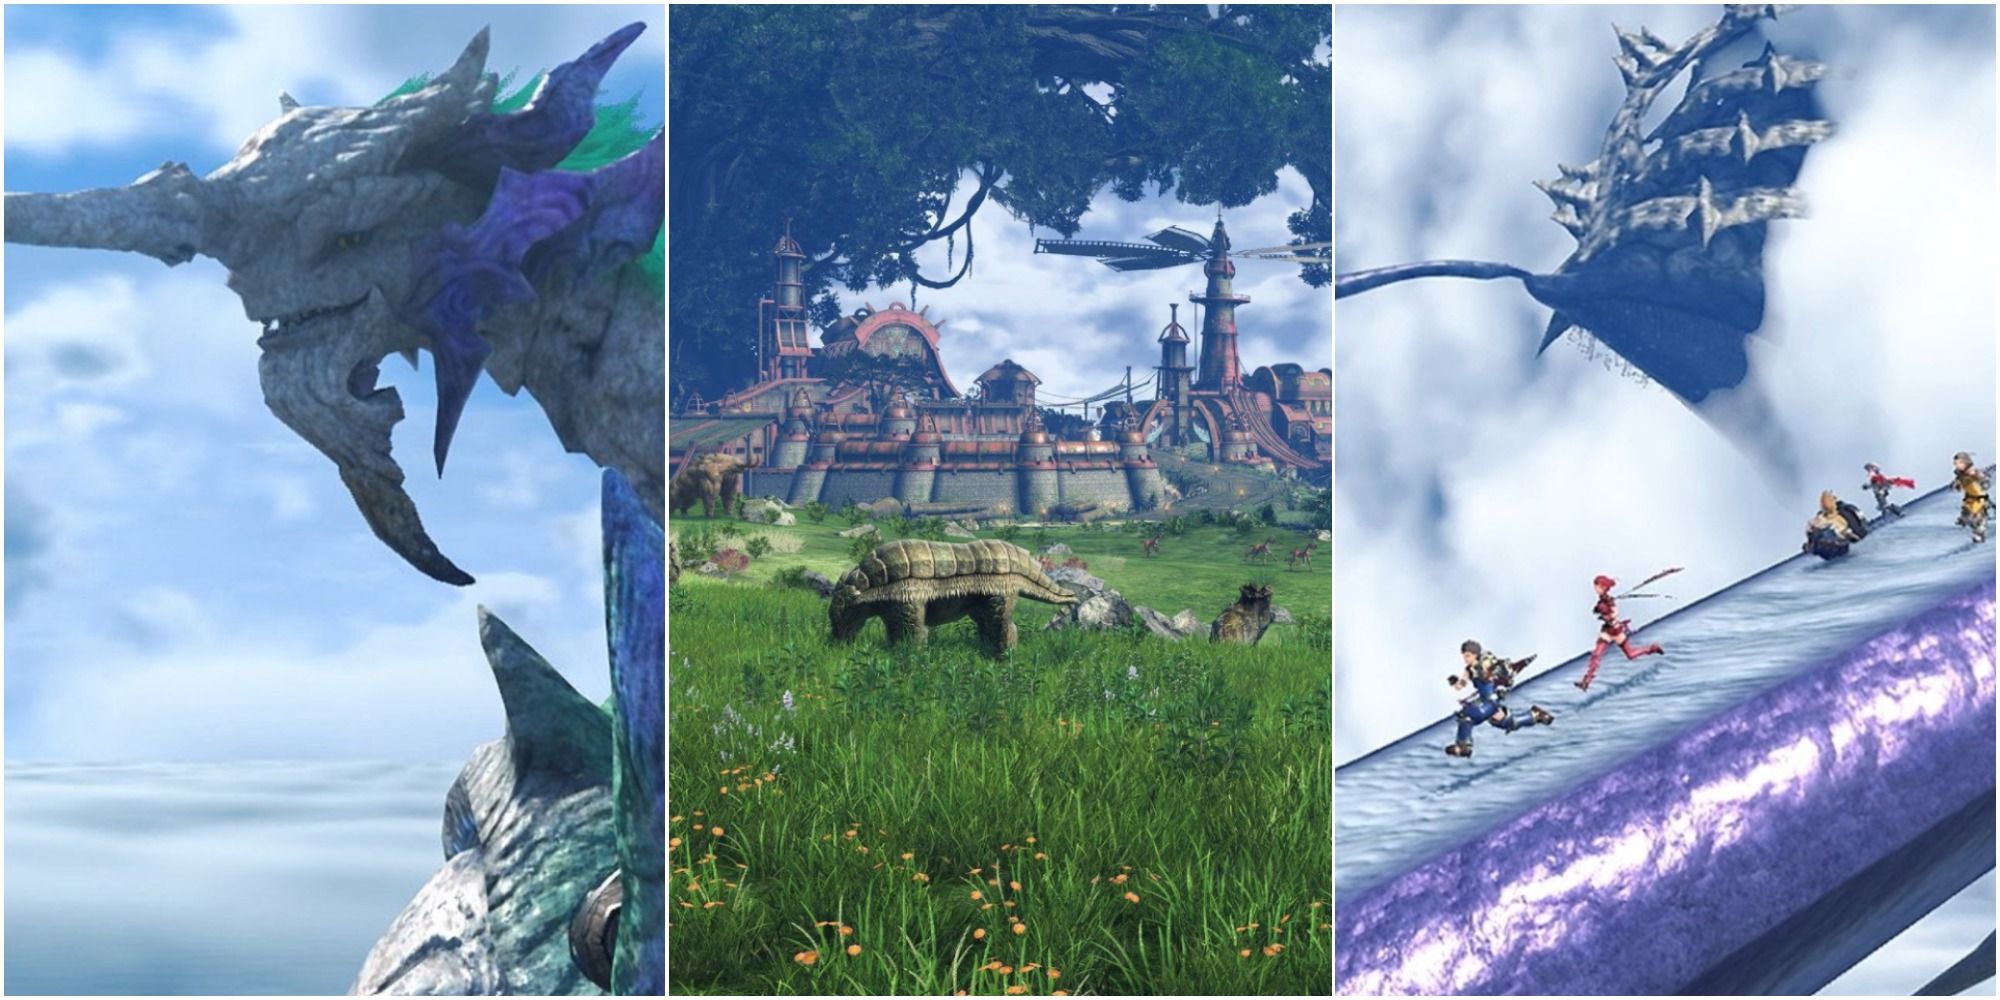 Xenoblade Chronicles 2 Locations on the left is the titan Azurda, in the middle is Torigoth in Gormott, and on the right is the The Leftherian Archipelago